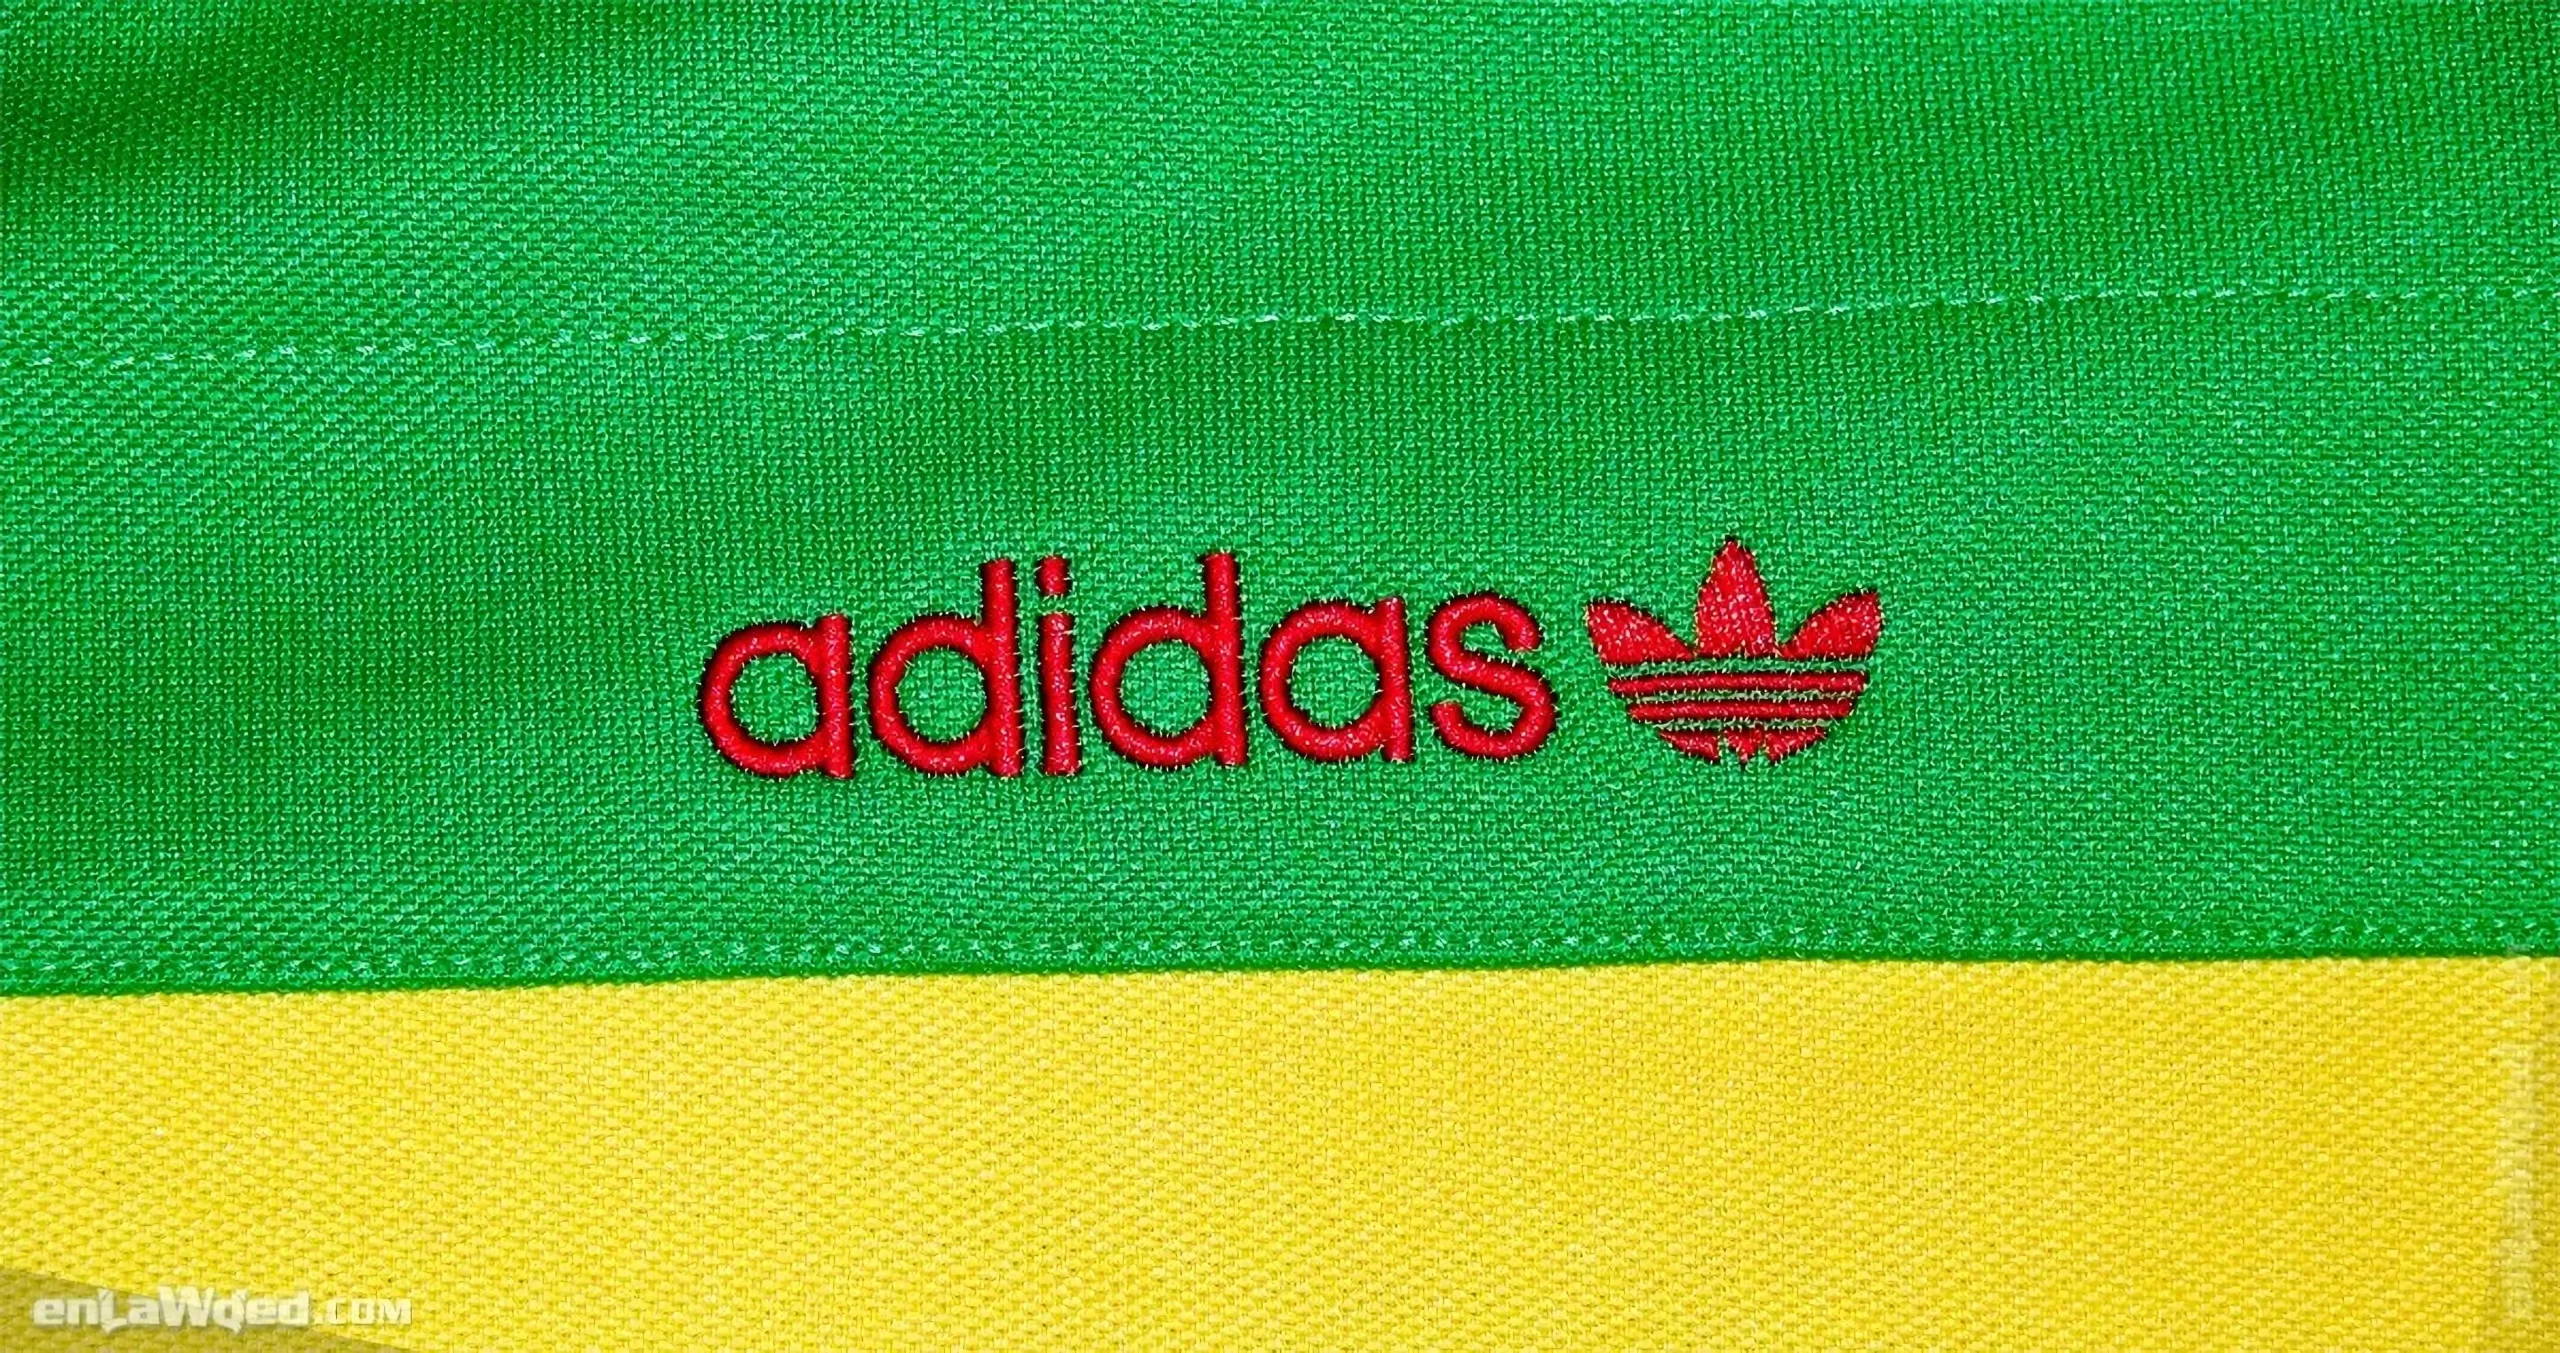 Zoom on the Adidas brand embroidered in red over green